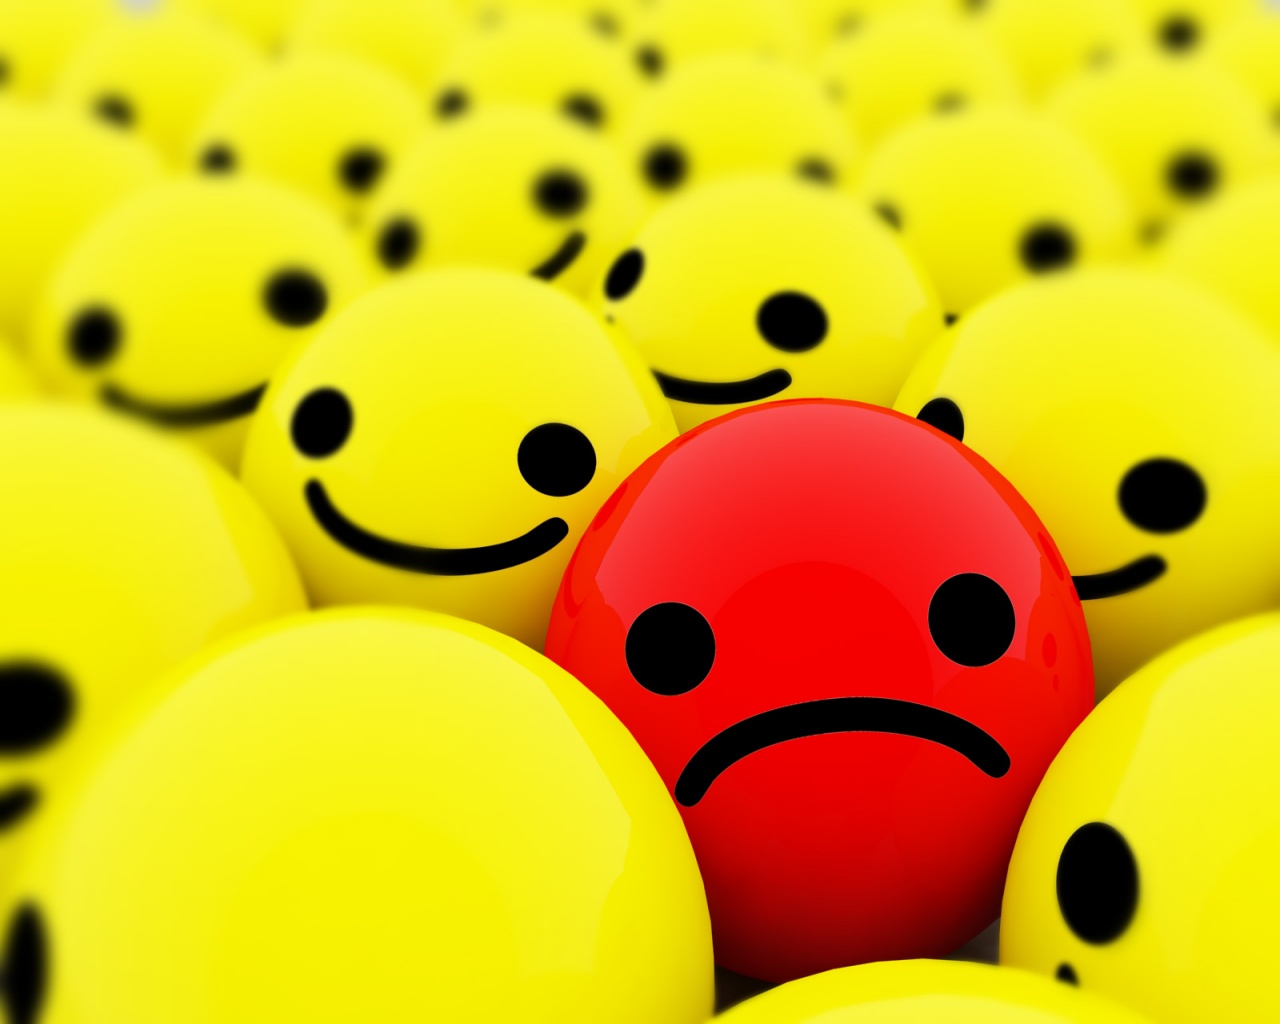 abstract wallpapers hd smiley